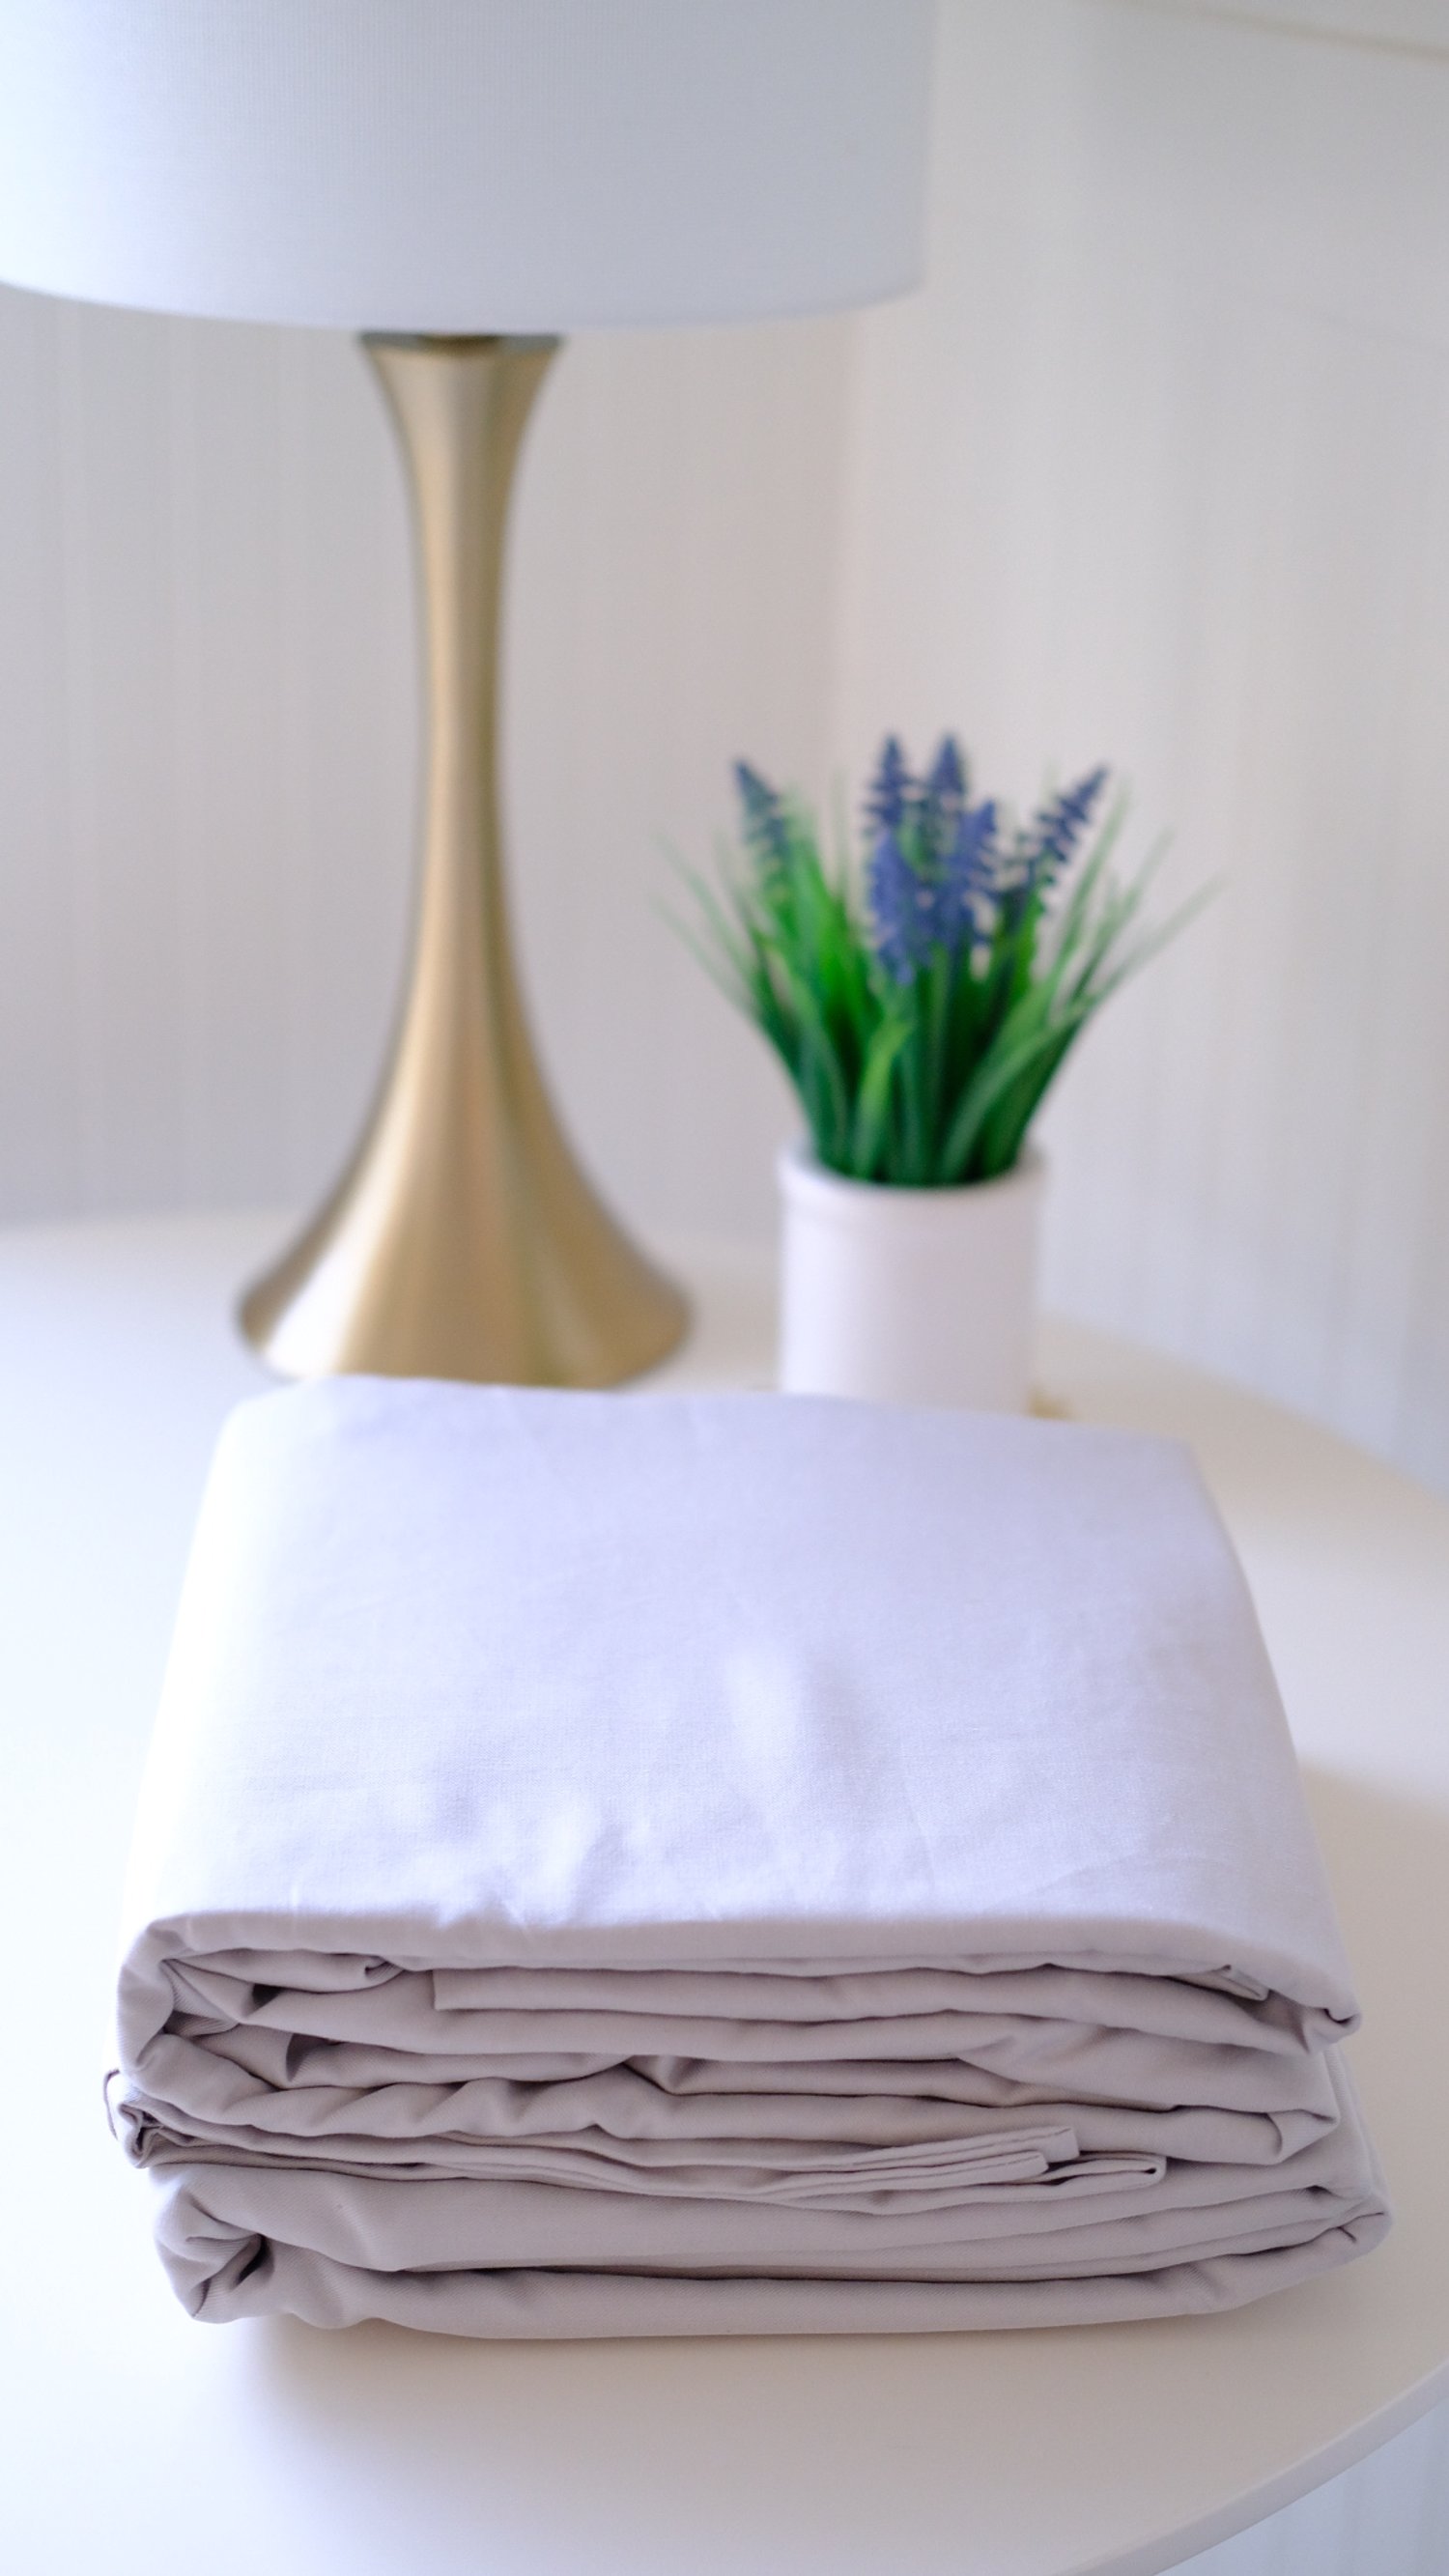 If you are looking for Cozy Earth bamboo linen sheets reviews, then look no further. I have everything you need to know about one of the newest products in the Cozy Earth bamboo bedding range. I have a Cozy Earth discount code that will get you a who